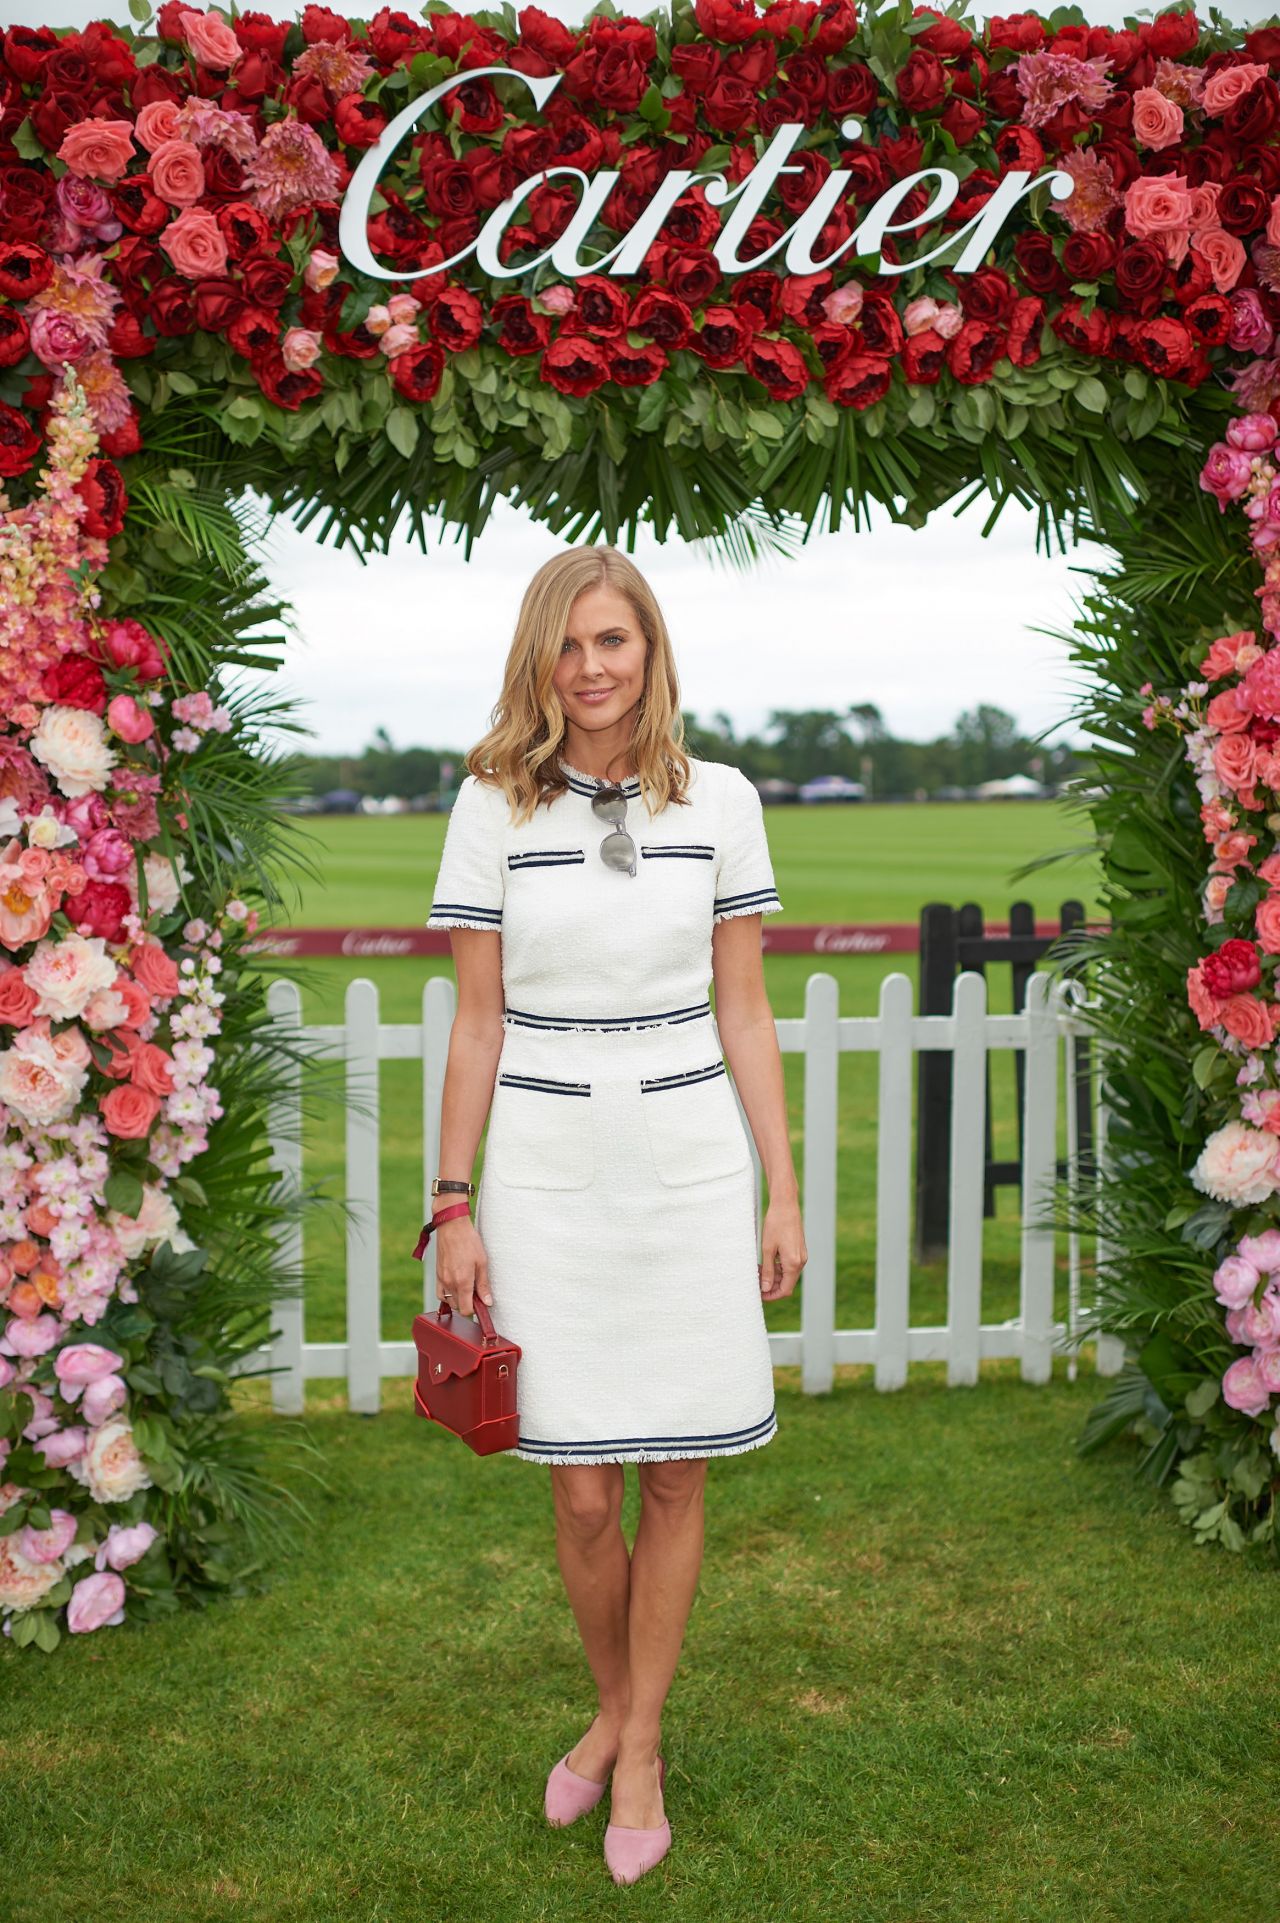 donna-air-cartier-queens-cup-polo-in-windsor-06-17-2018-4.jpg